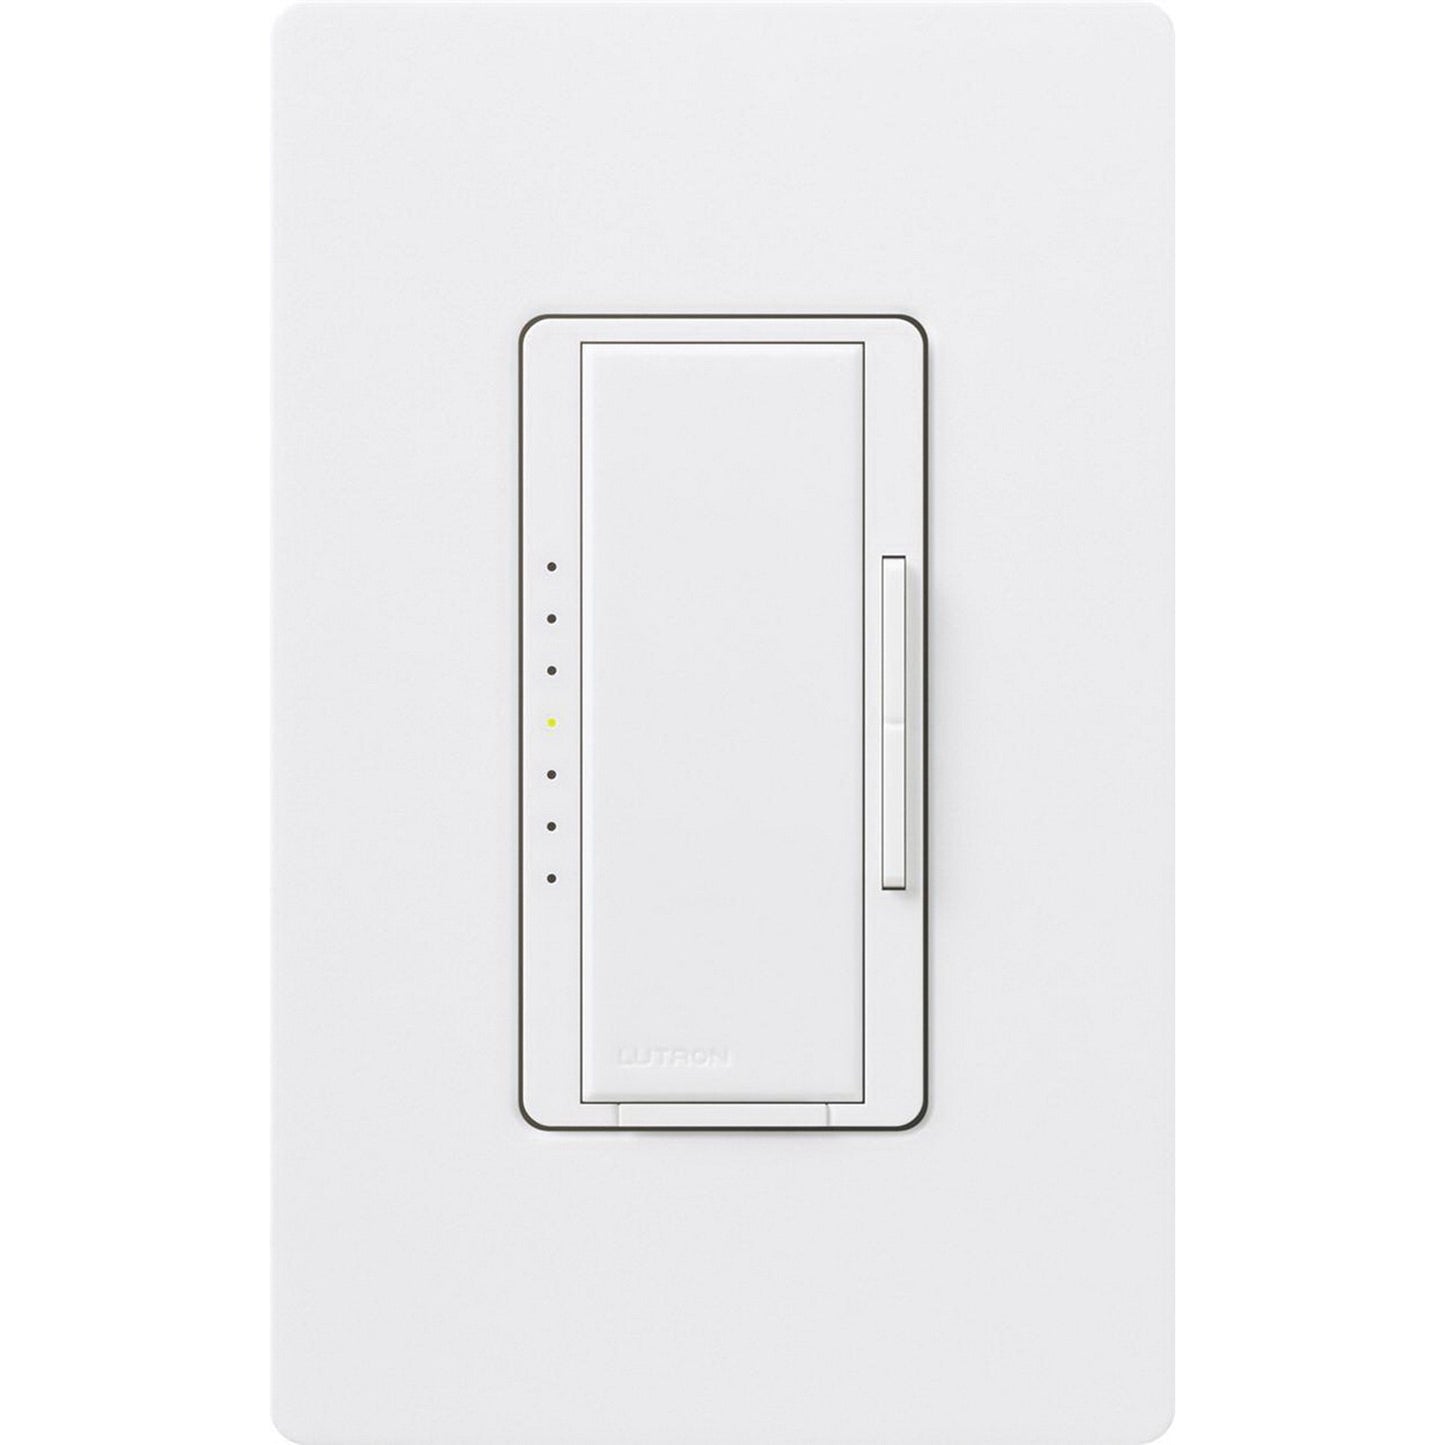 Lutron Maestro C.L Multi-Location Dimmer 150W Cfl/LED or 600W Inc/Hal 120V, Vive, Enabled, White, MRF2S-6CL-WH